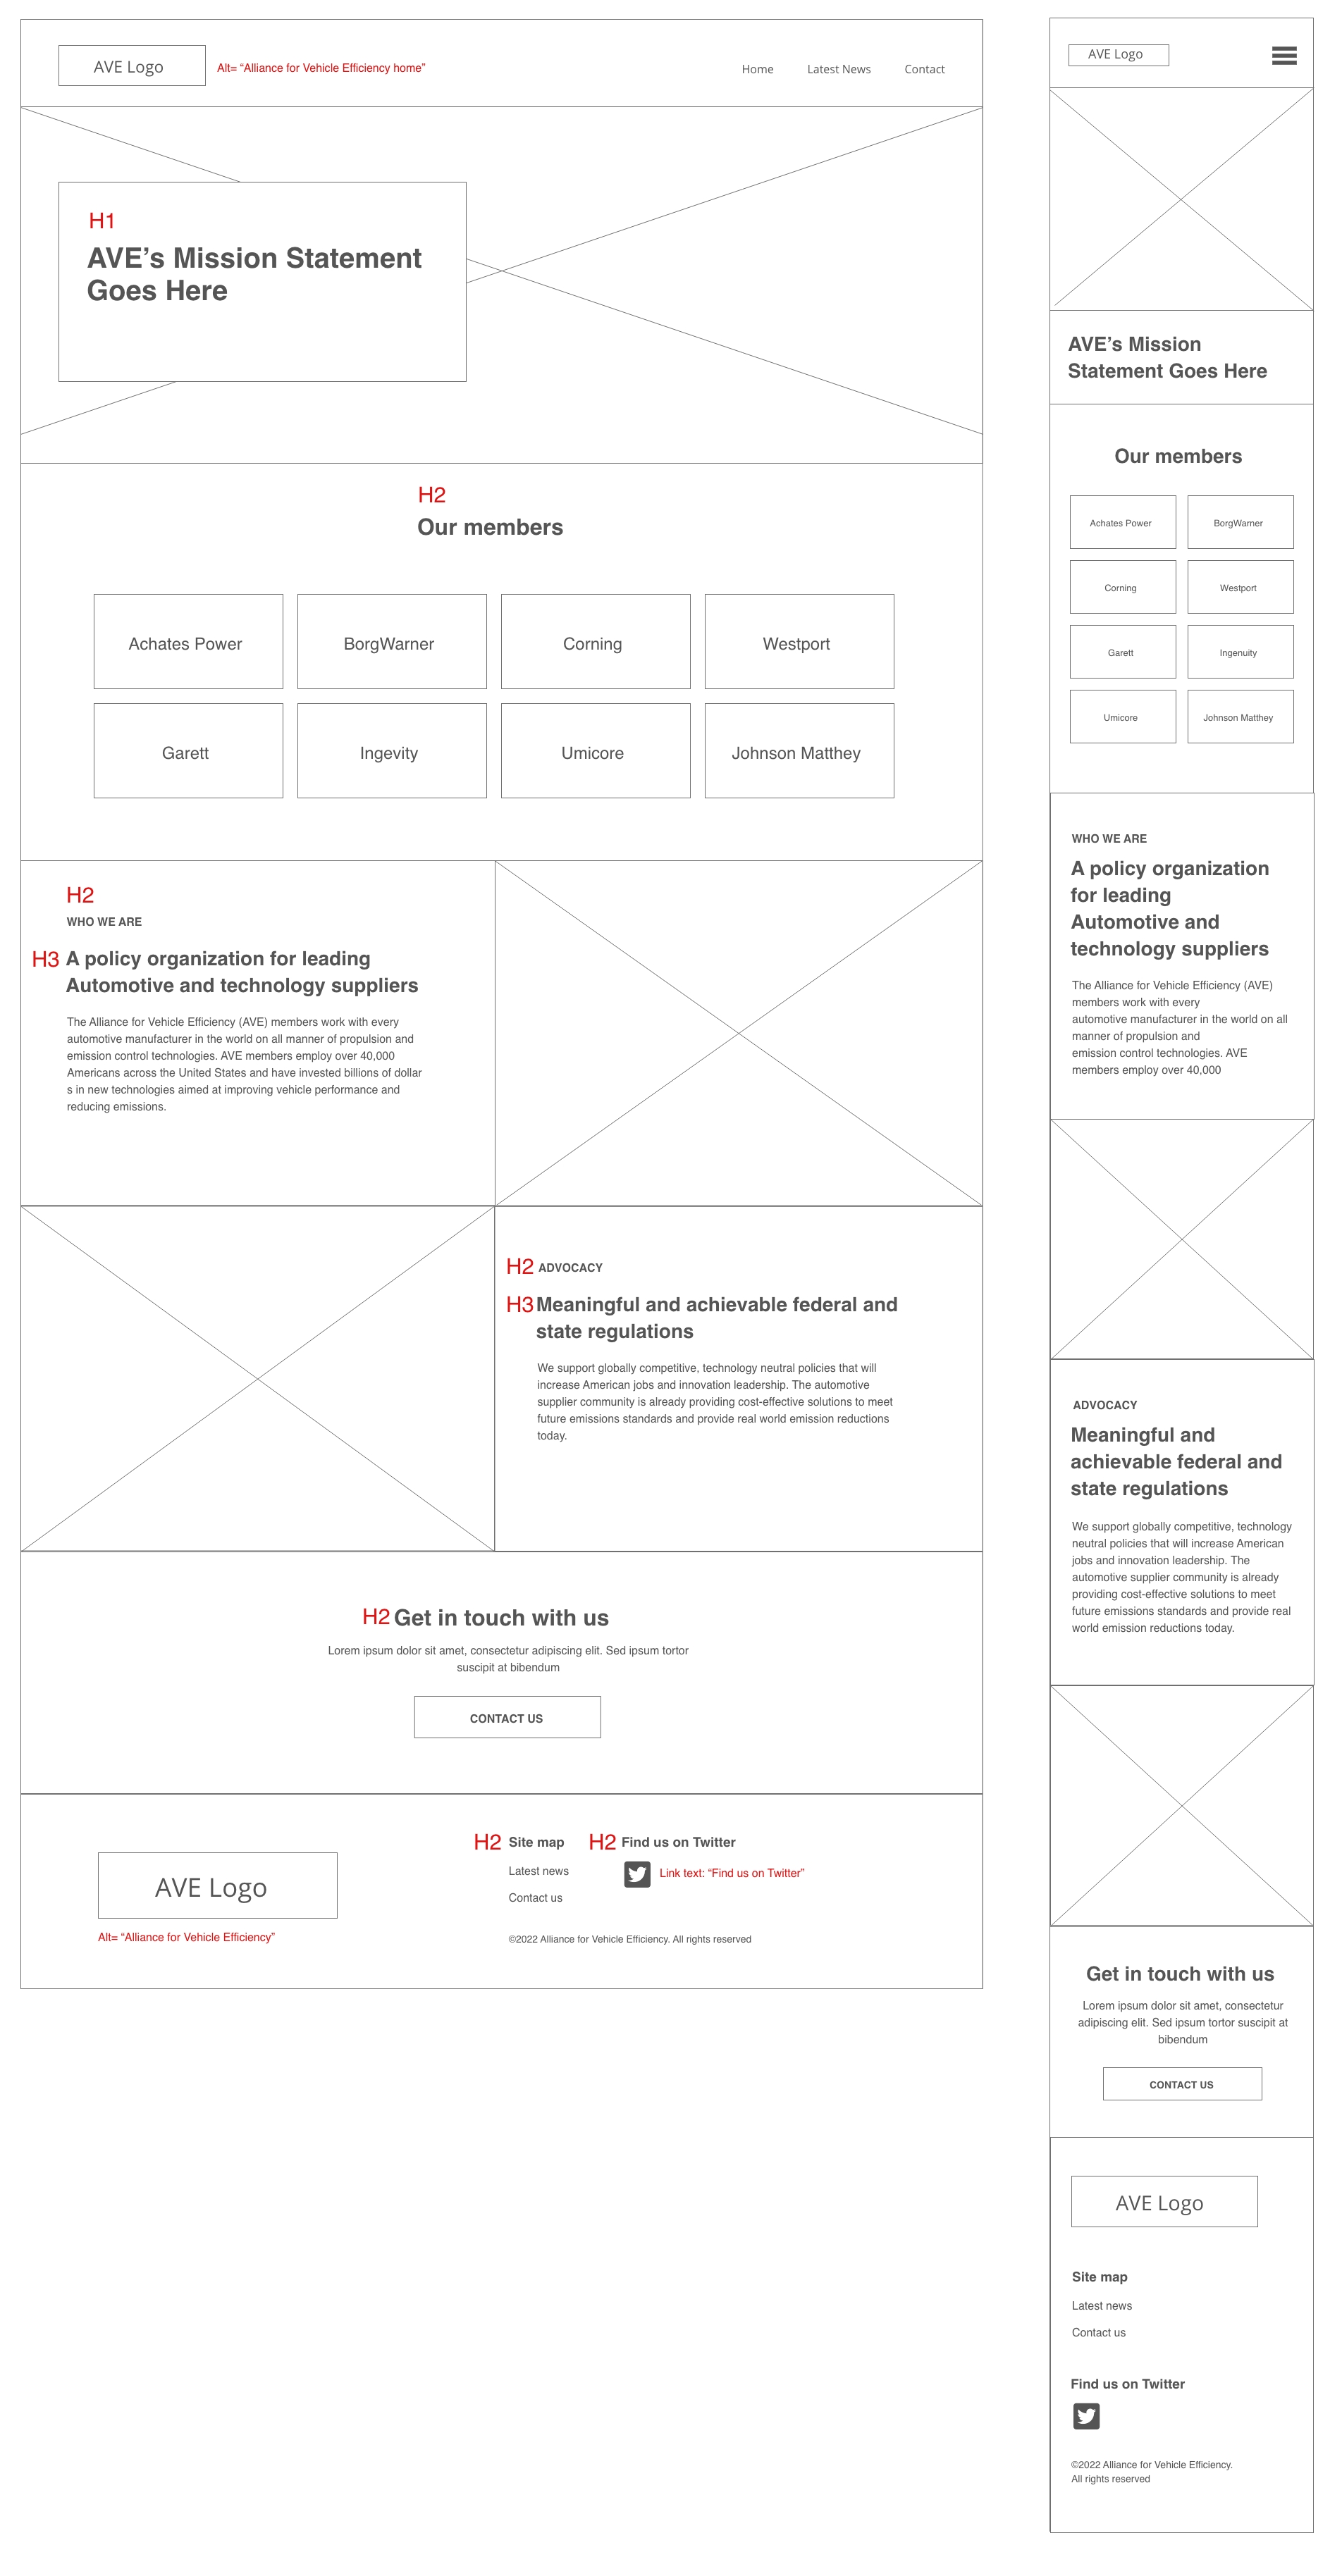 Mid fidelity wireframes that include heading structure for the page, image alt text and link text for social icons.